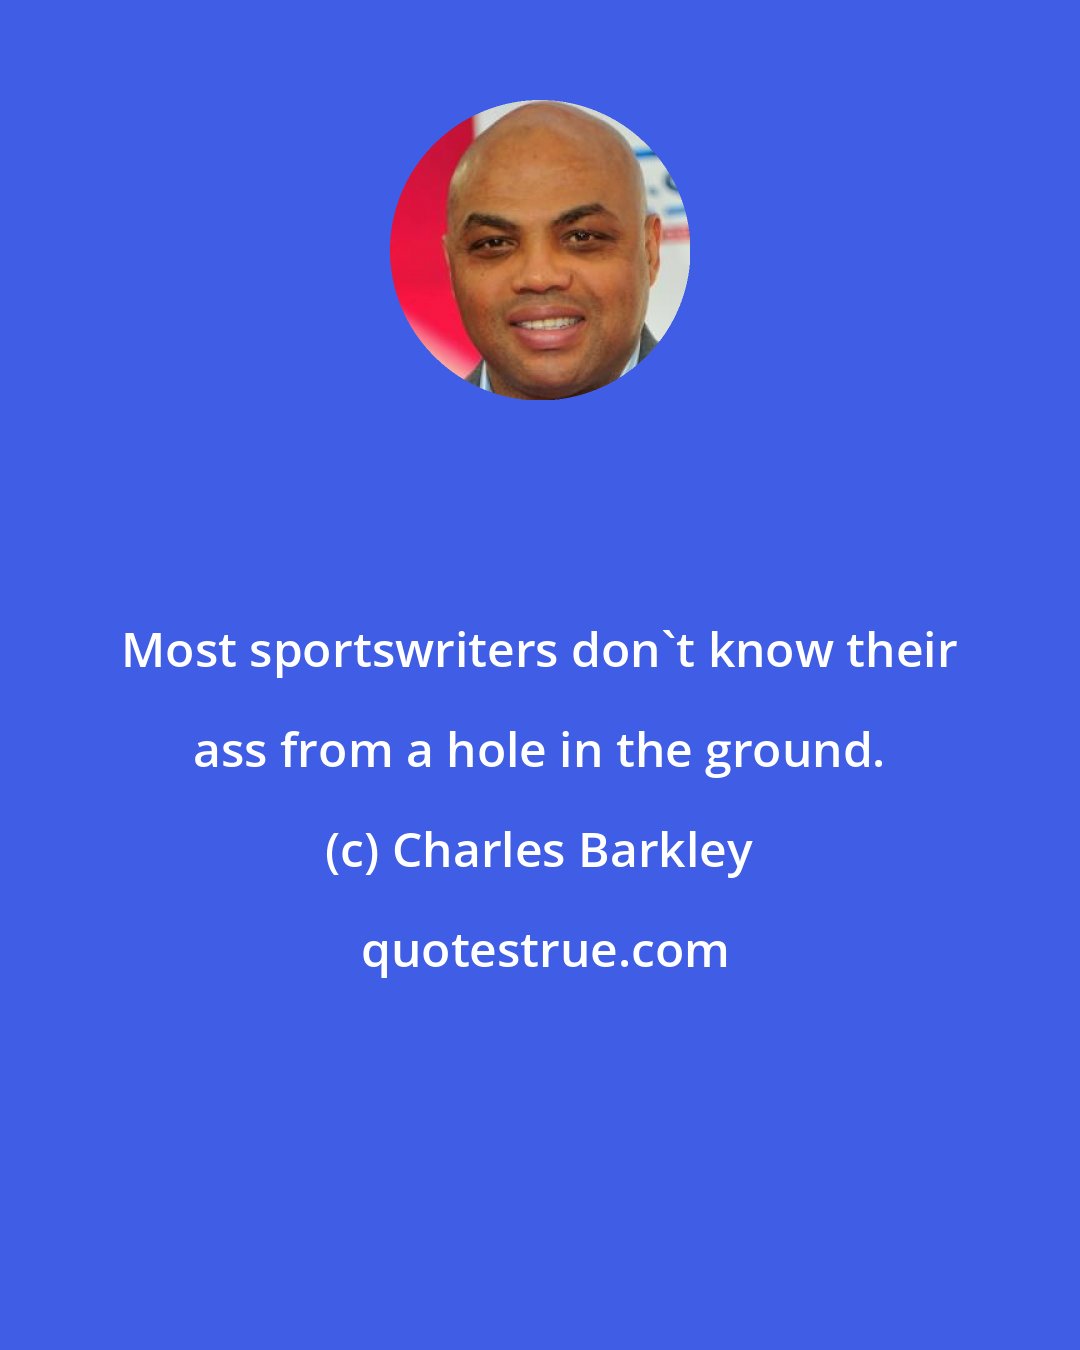 Charles Barkley: Most sportswriters don't know their ass from a hole in the ground.